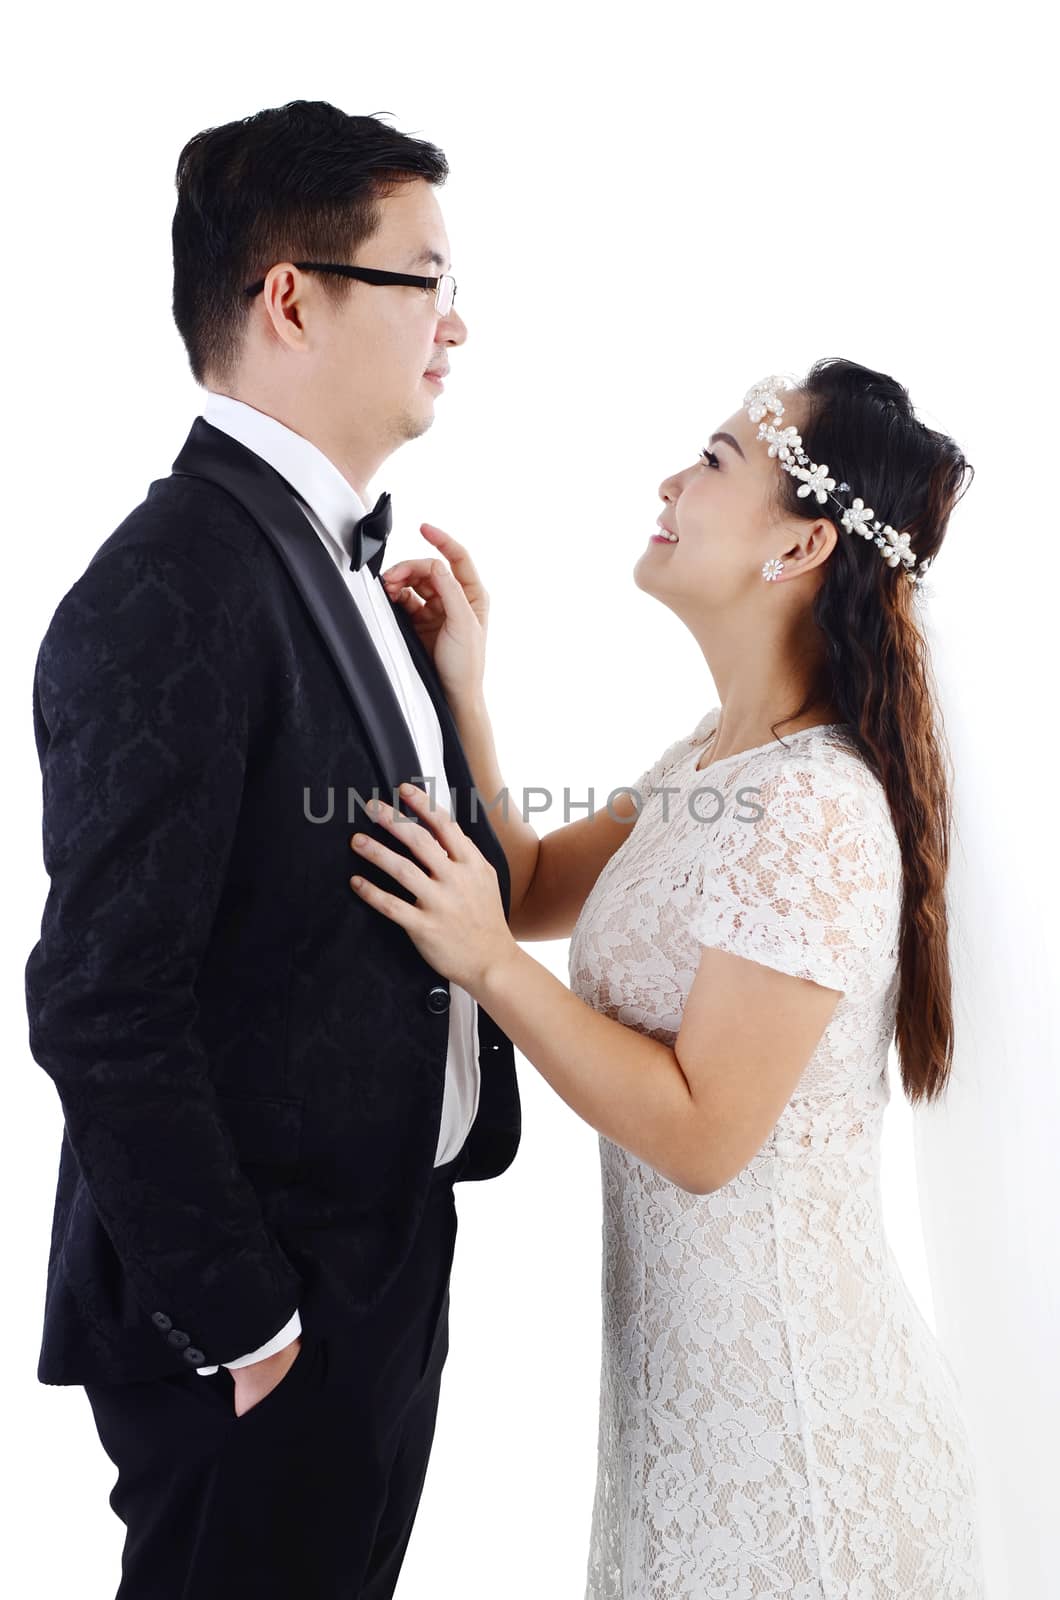 Portrait of young elegant enamoured just married groom and bride embracing at Wedding on white background